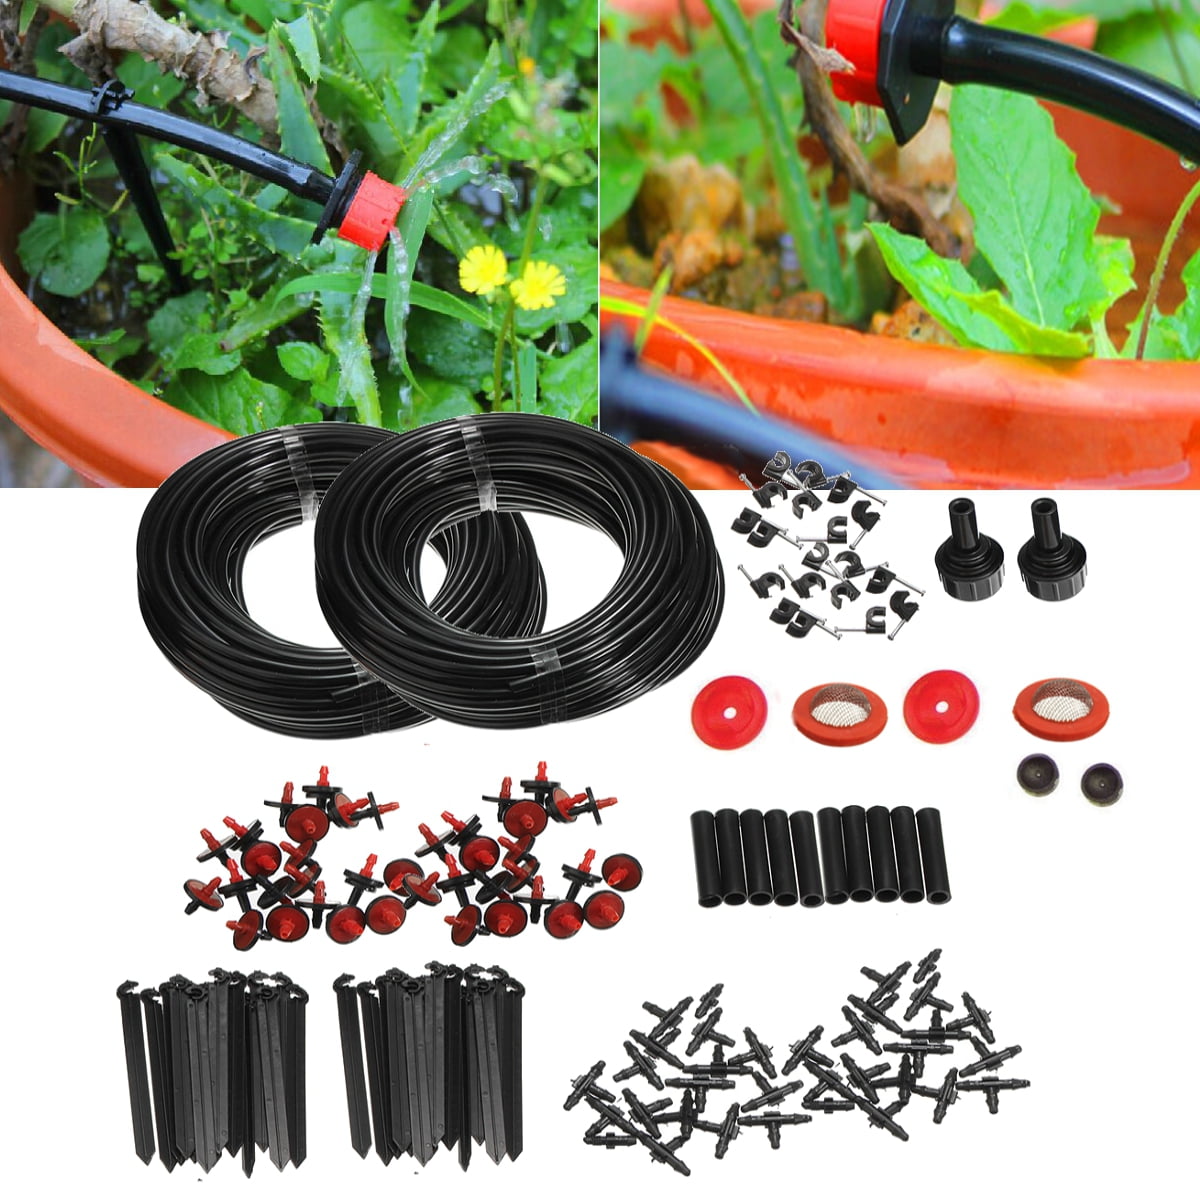 Details about   50X Dripper Plant Watering Garden Hose Timer Micro Drip Irrigation System Kits 